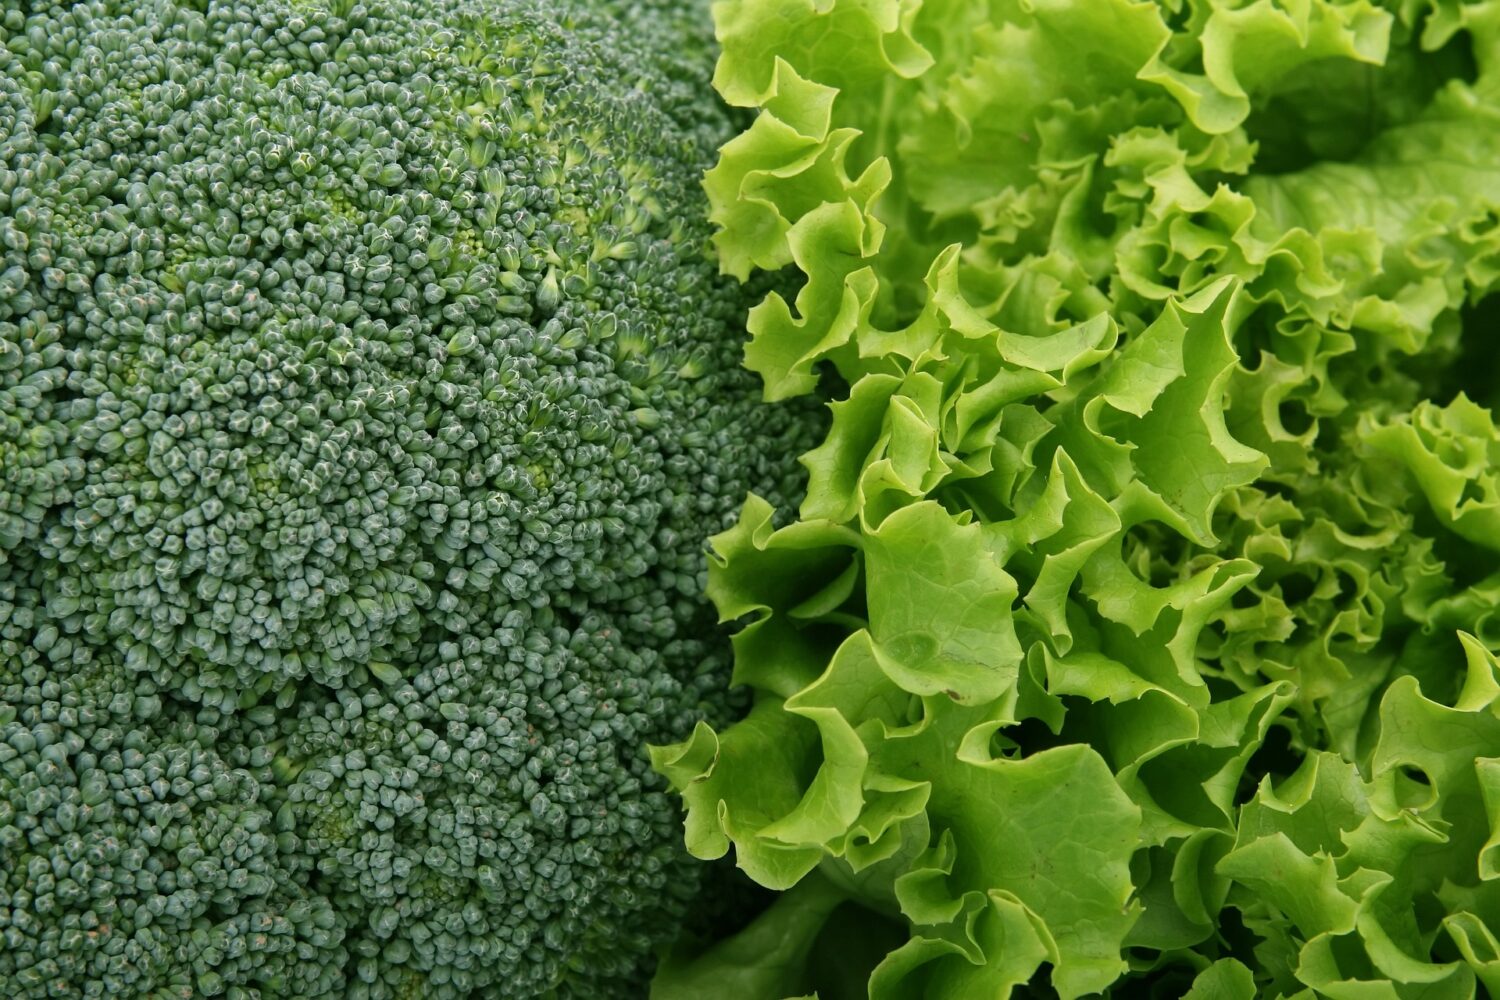 Aerial view of broccoli and lettuce leafy greens that will strengthen your teeth and gums